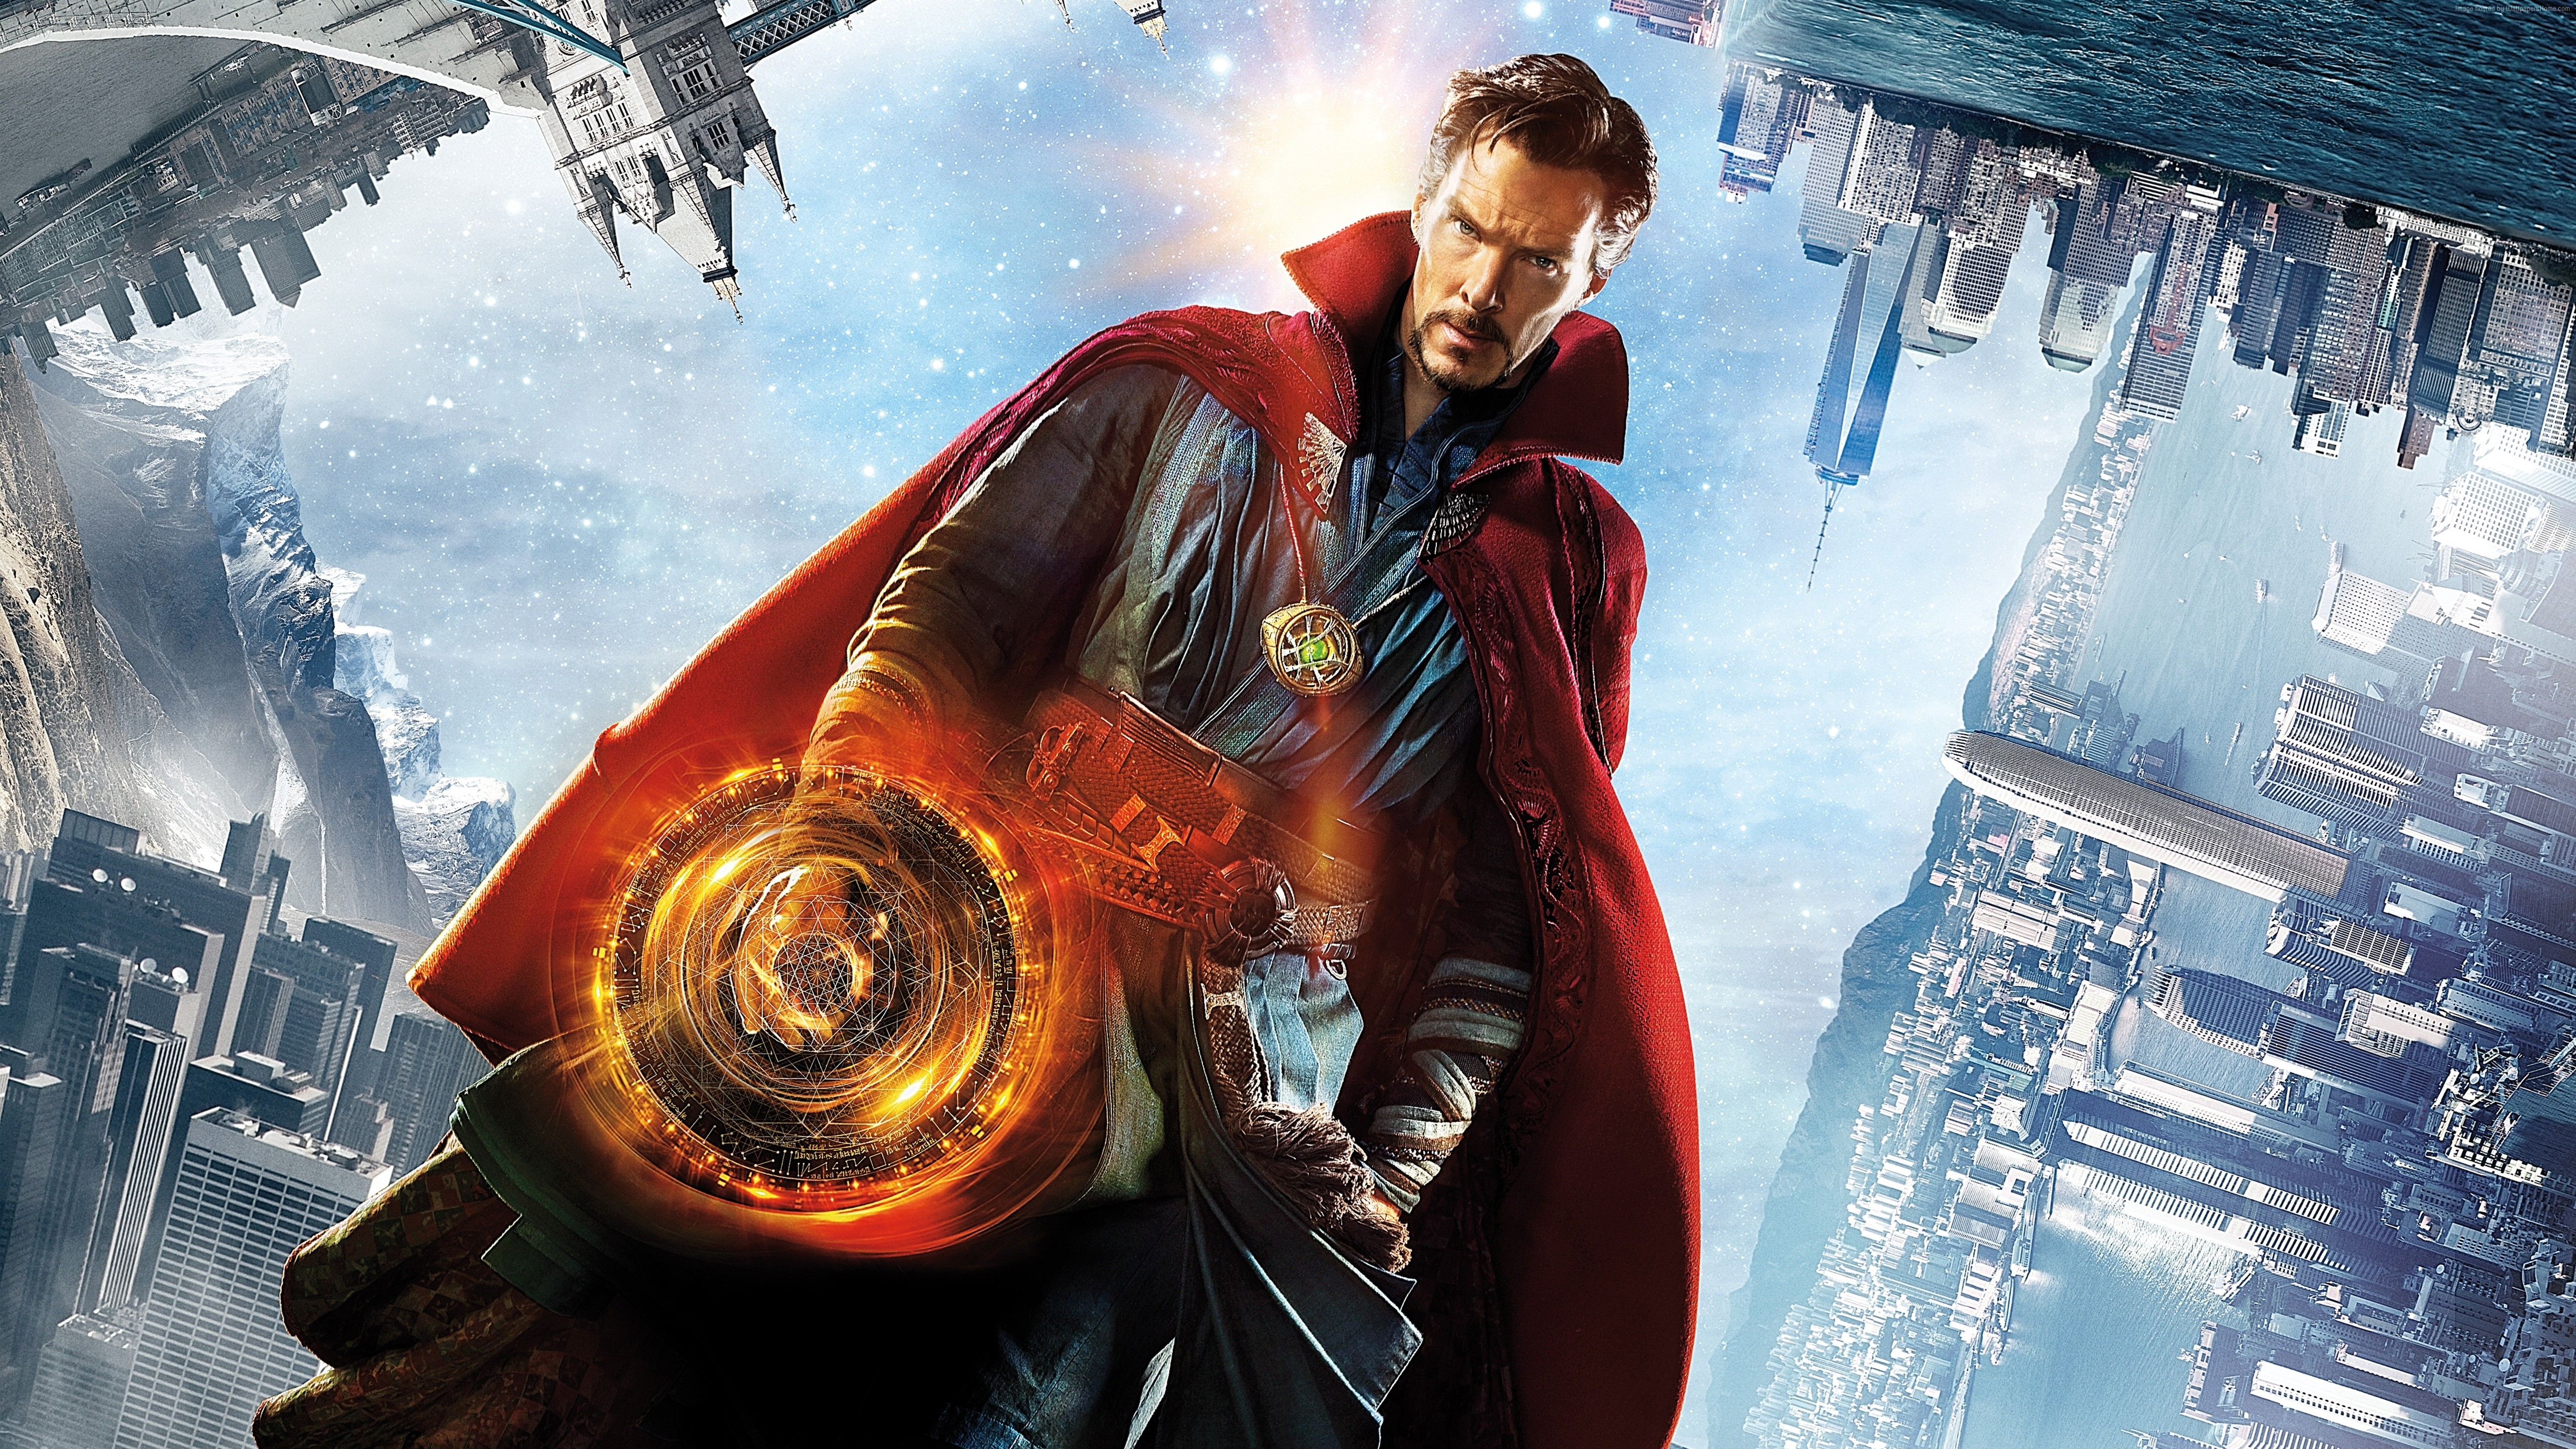 Free photo Dr. Strange from the movie Avengers